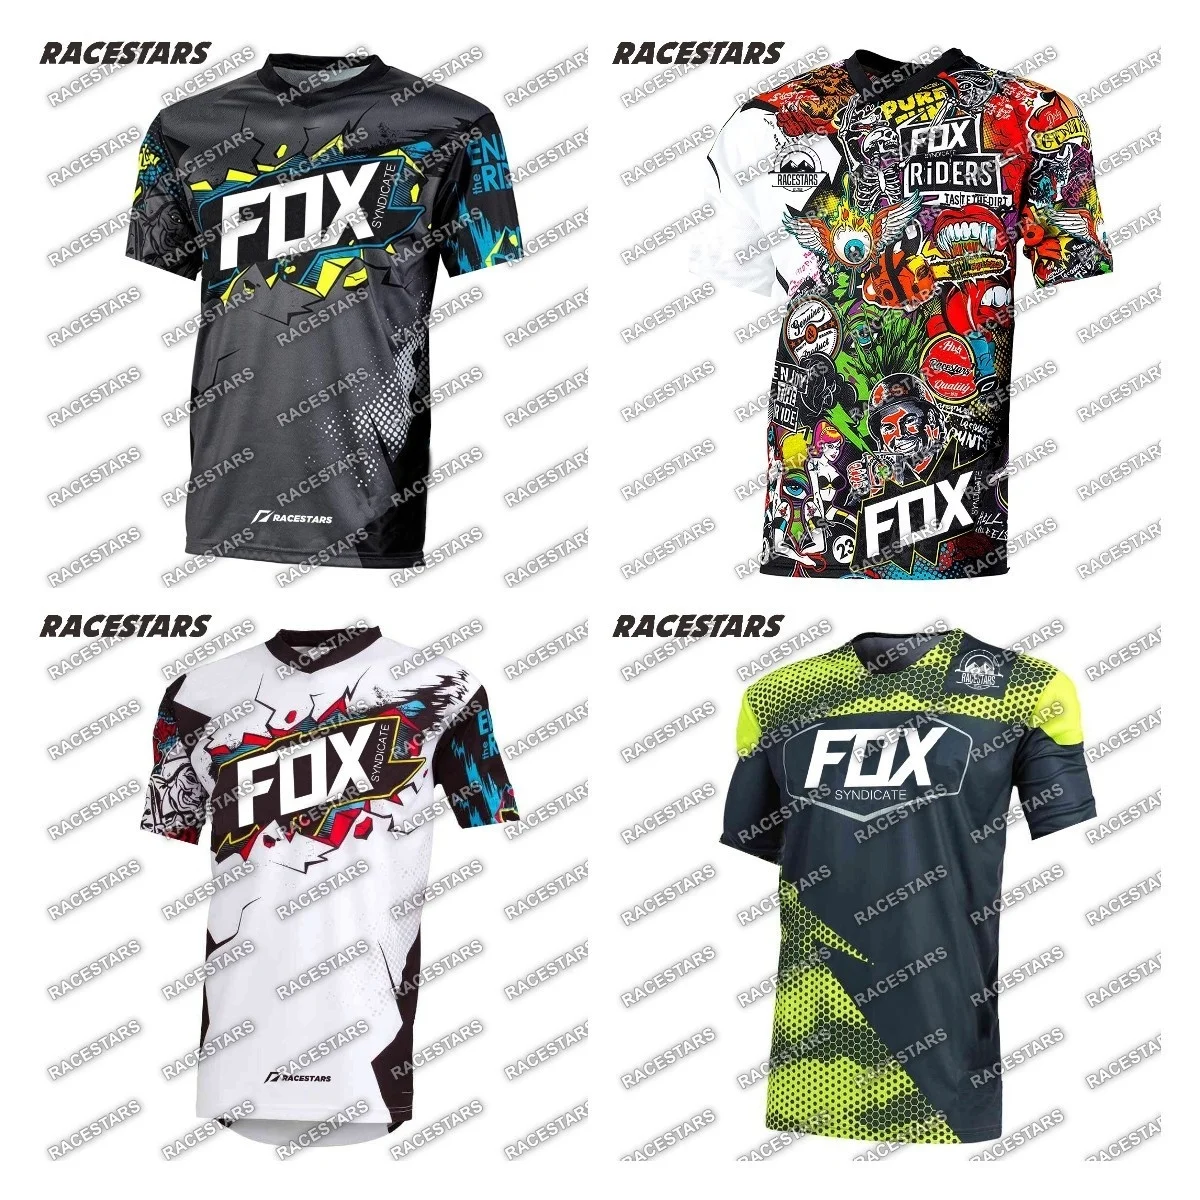 

Downhill Mountain Short Sleeve Cycling Jersey Dirt Bike Motocross Shirt Cross Country MTB Motorcycle Enduro Maillot Ciclismo DH